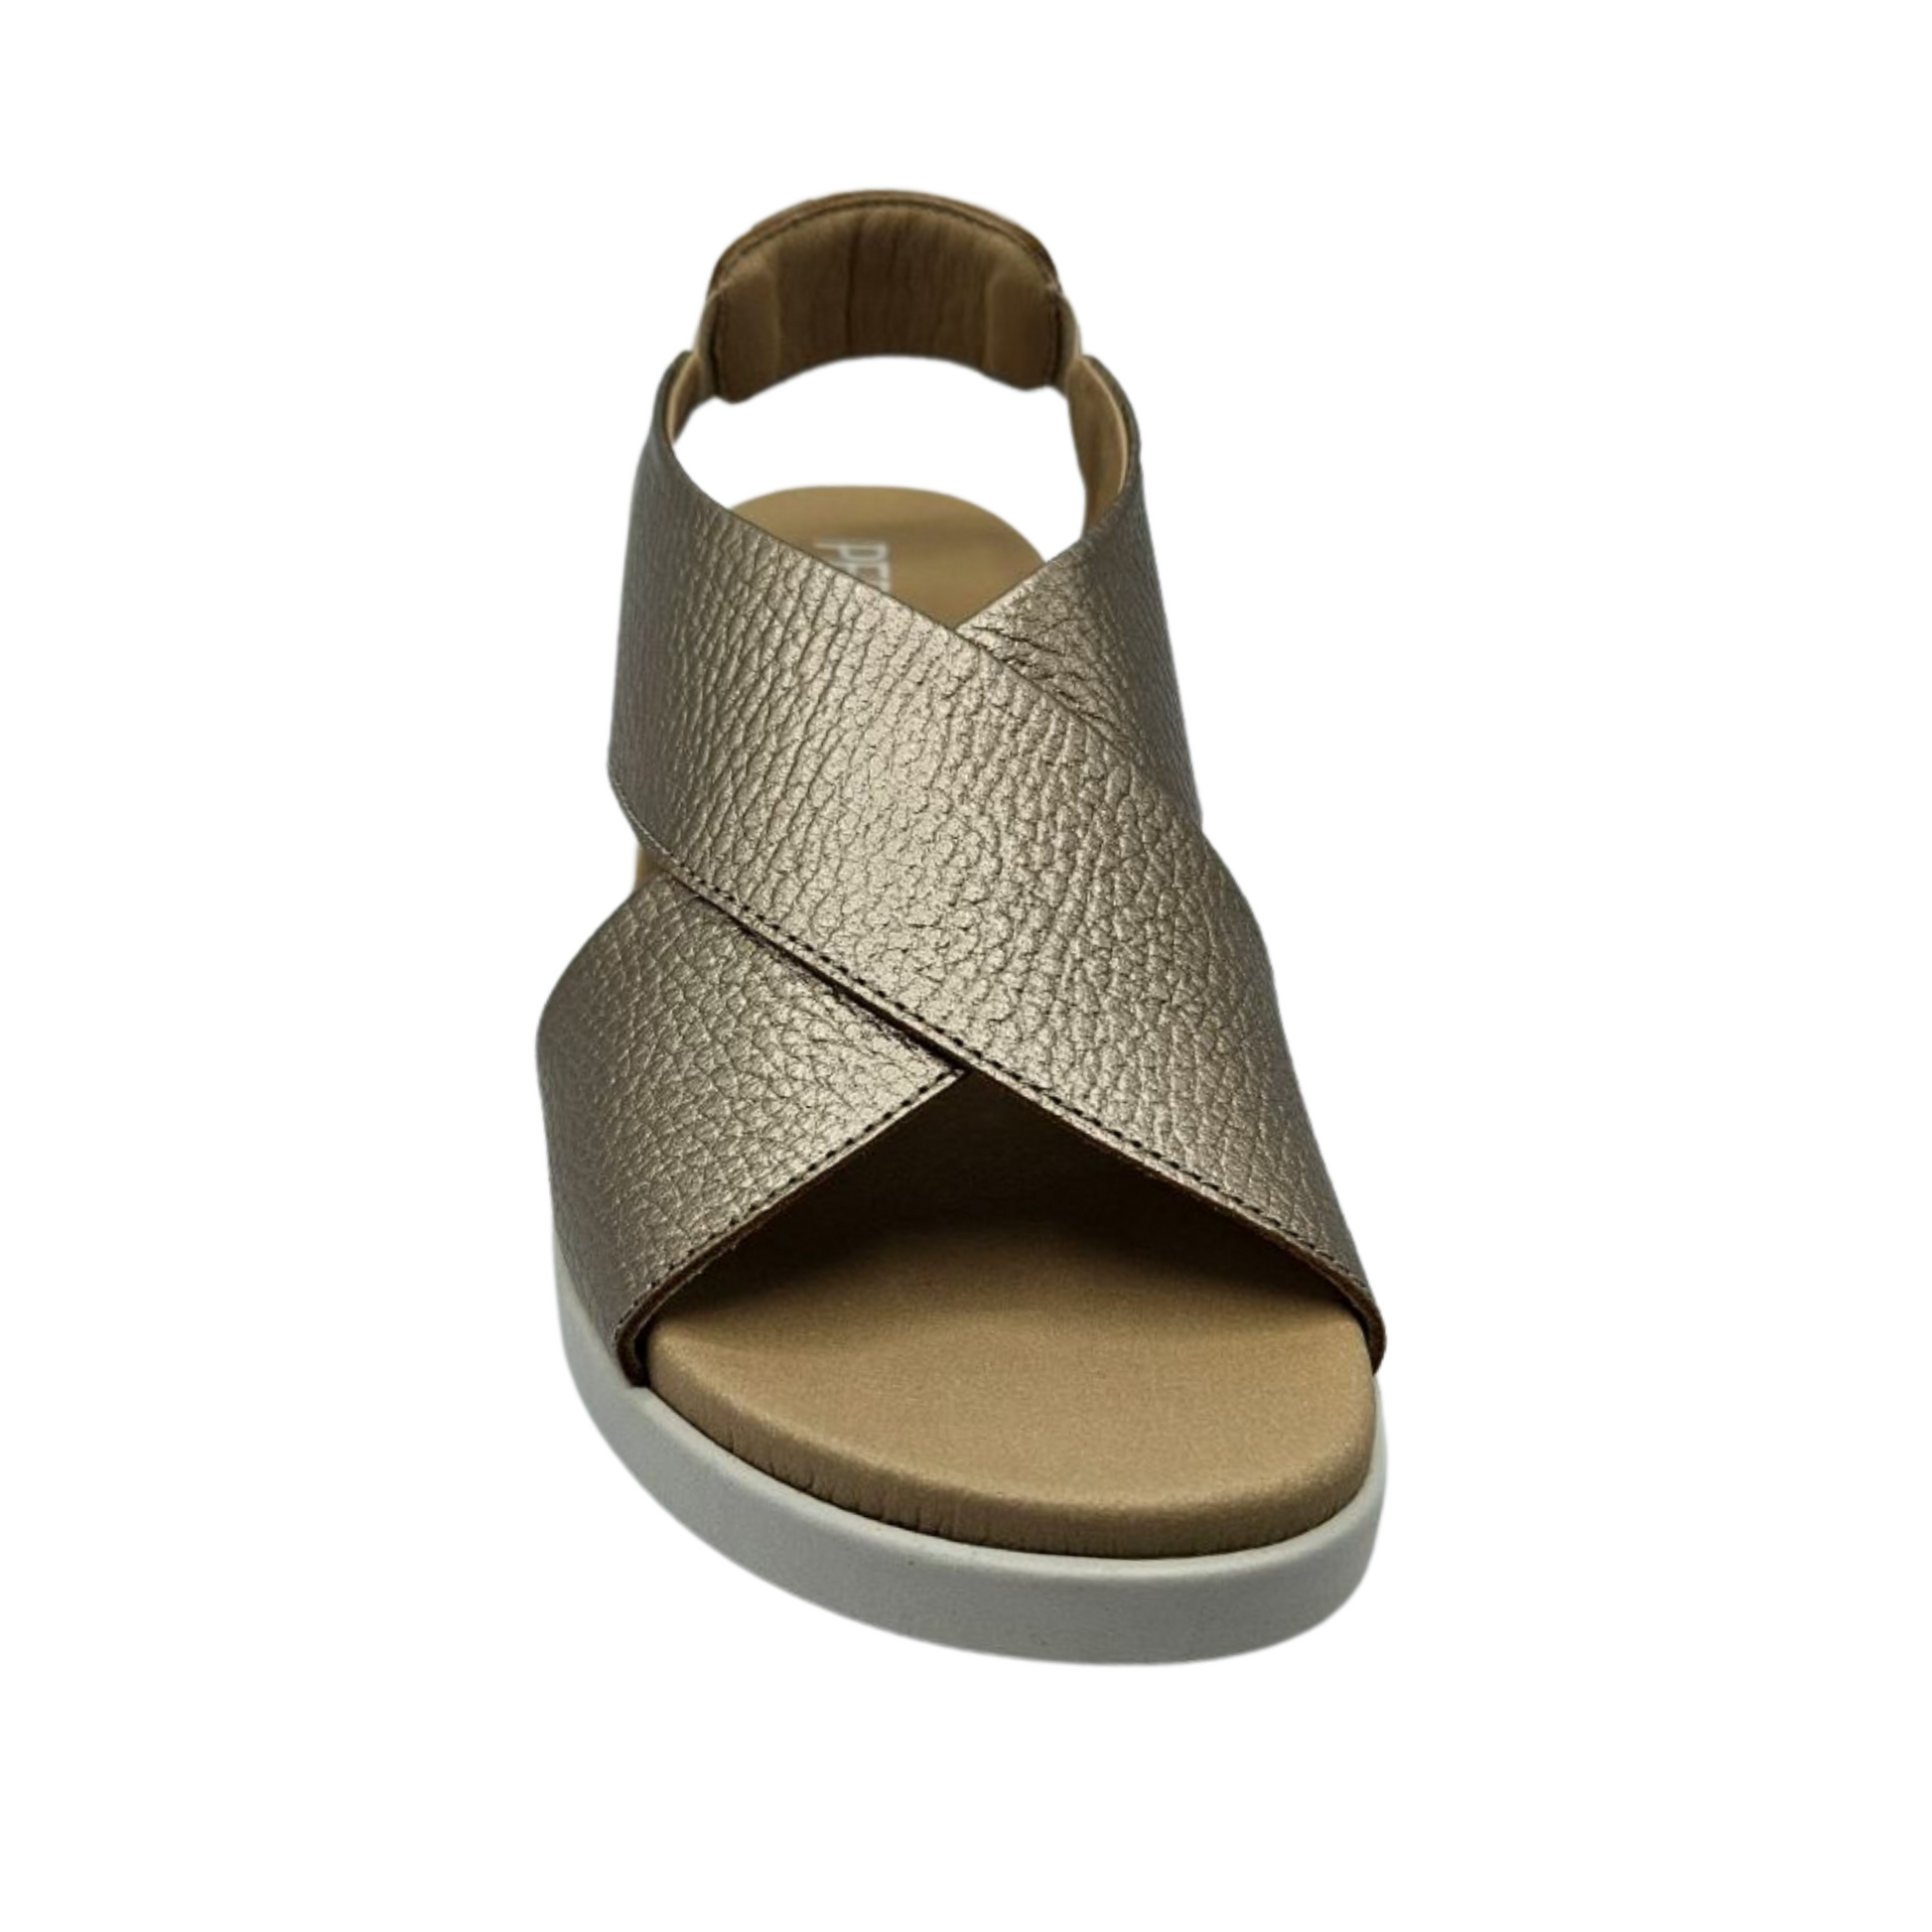 Front facing view of metallic gold leather sandal with crossed straps, white rubber outsole and elasticated back strap